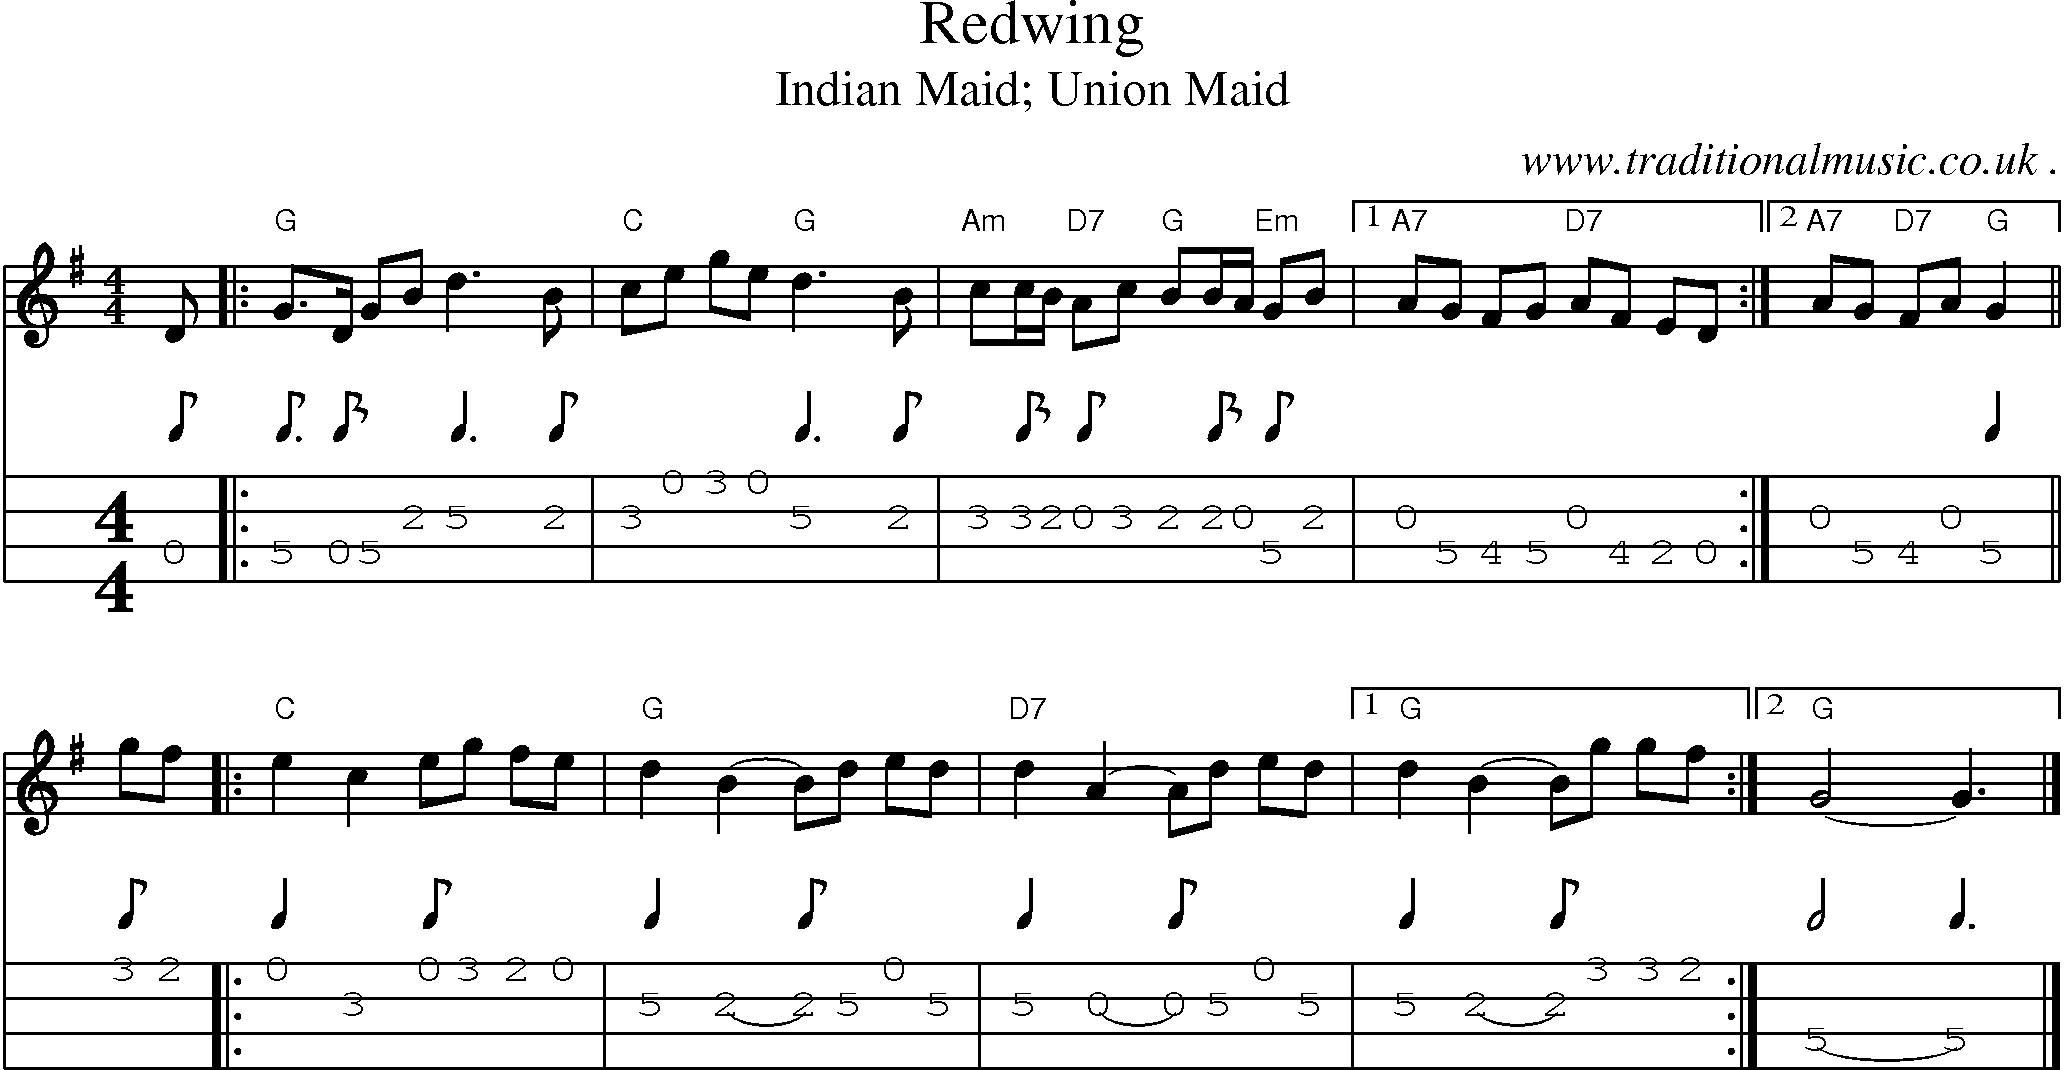 Music Score and Guitar Tabs for Redwing